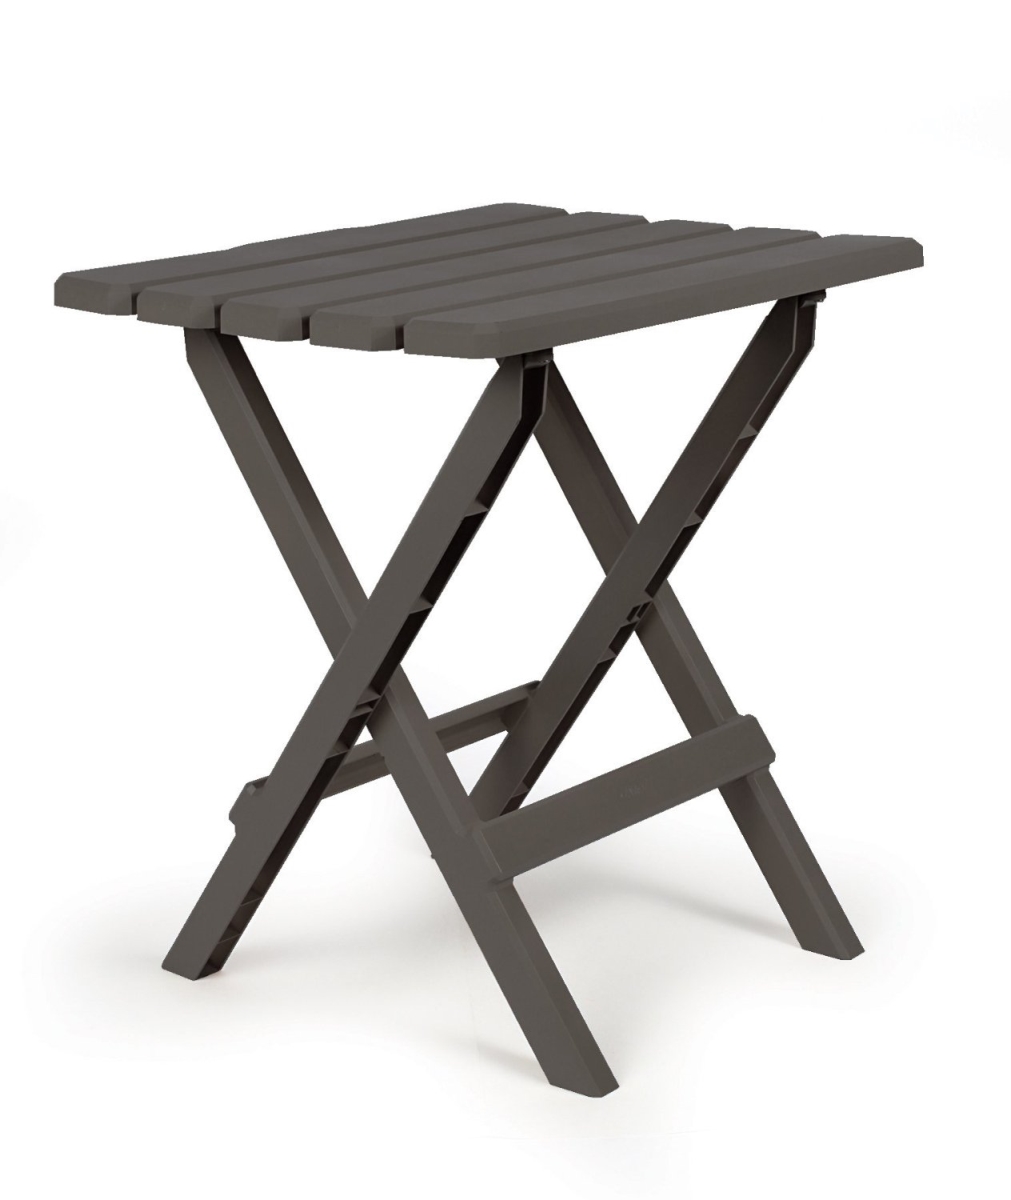 C1w-51885 Table Folding Large Charcoal